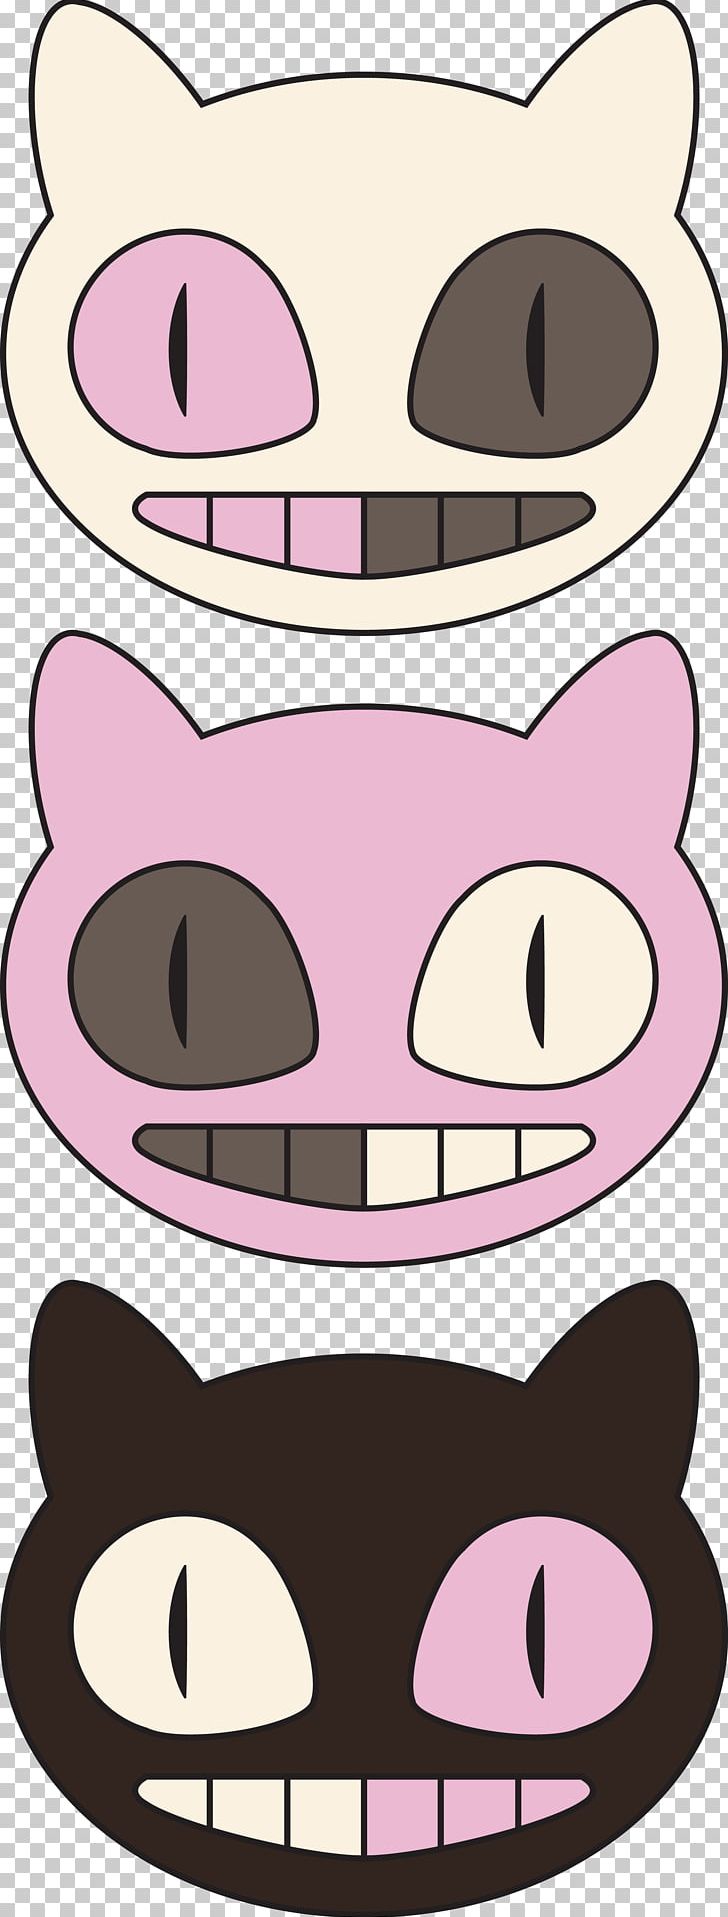 Snout S.S.C. Napoli Eccentric PNG, Clipart, Cam, Cartoon, Character, Cheek, Cookie Cat Free PNG Download